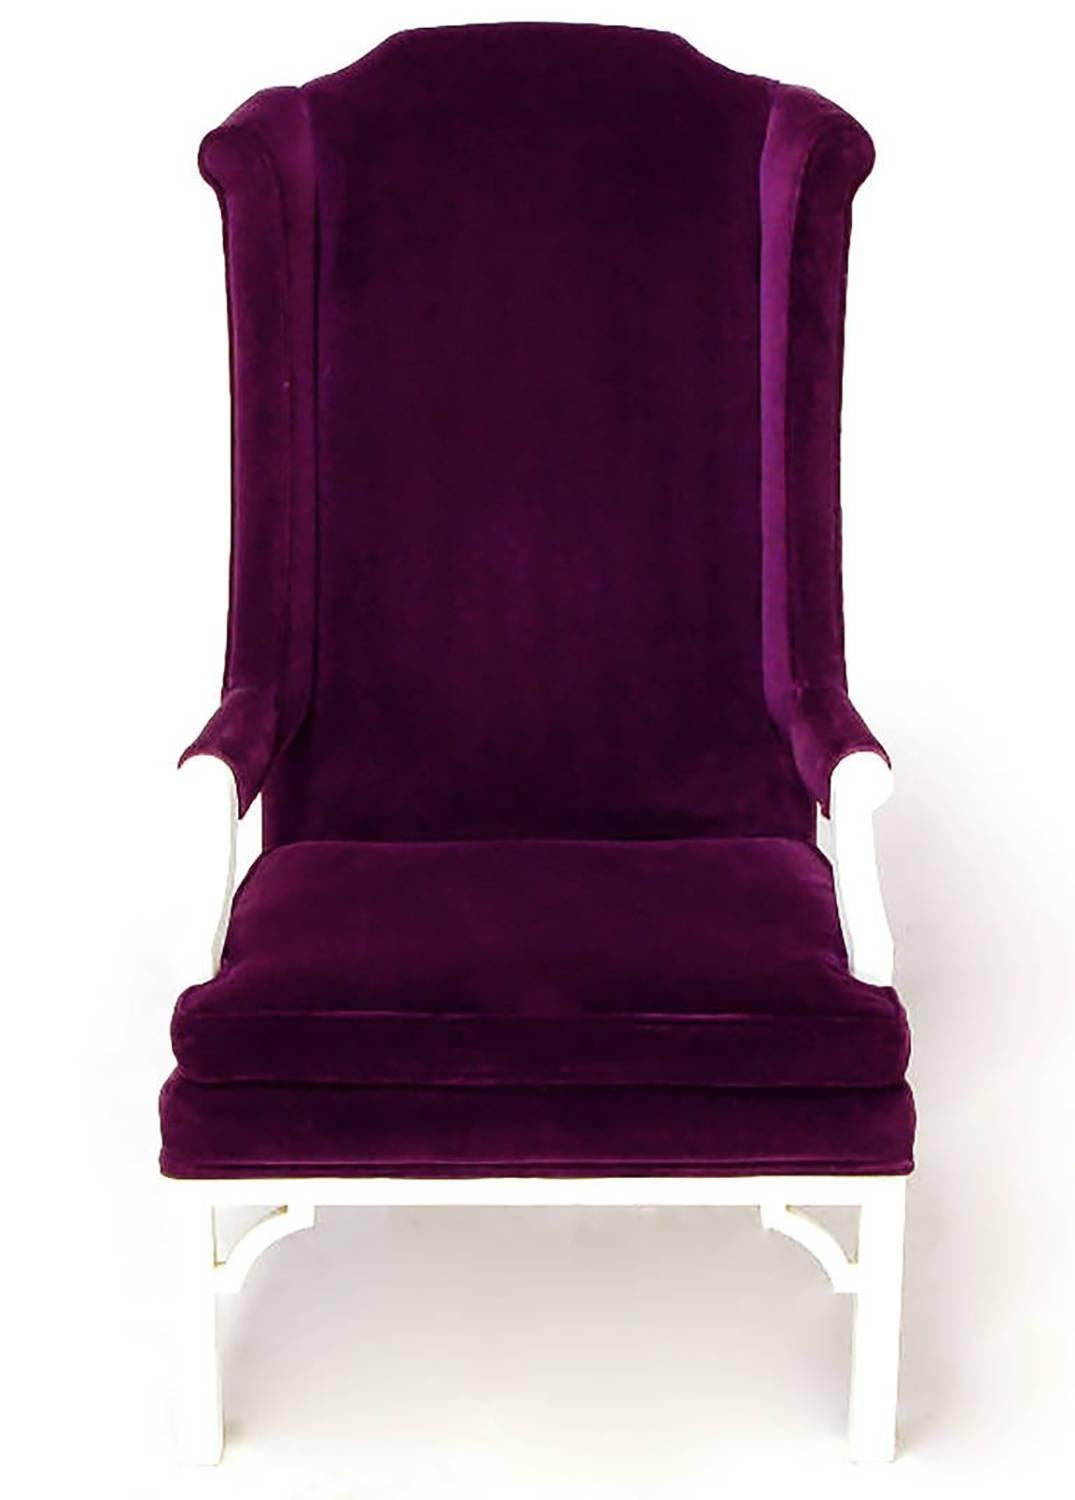 Plum velvet upholstered neo-Chippendale wing chair from Erwin-Lambeth. White satin lacquered frame with open arms. Carved front legs with quatrefoil and elongated oval insets, open corner brackets and saber style back legs.